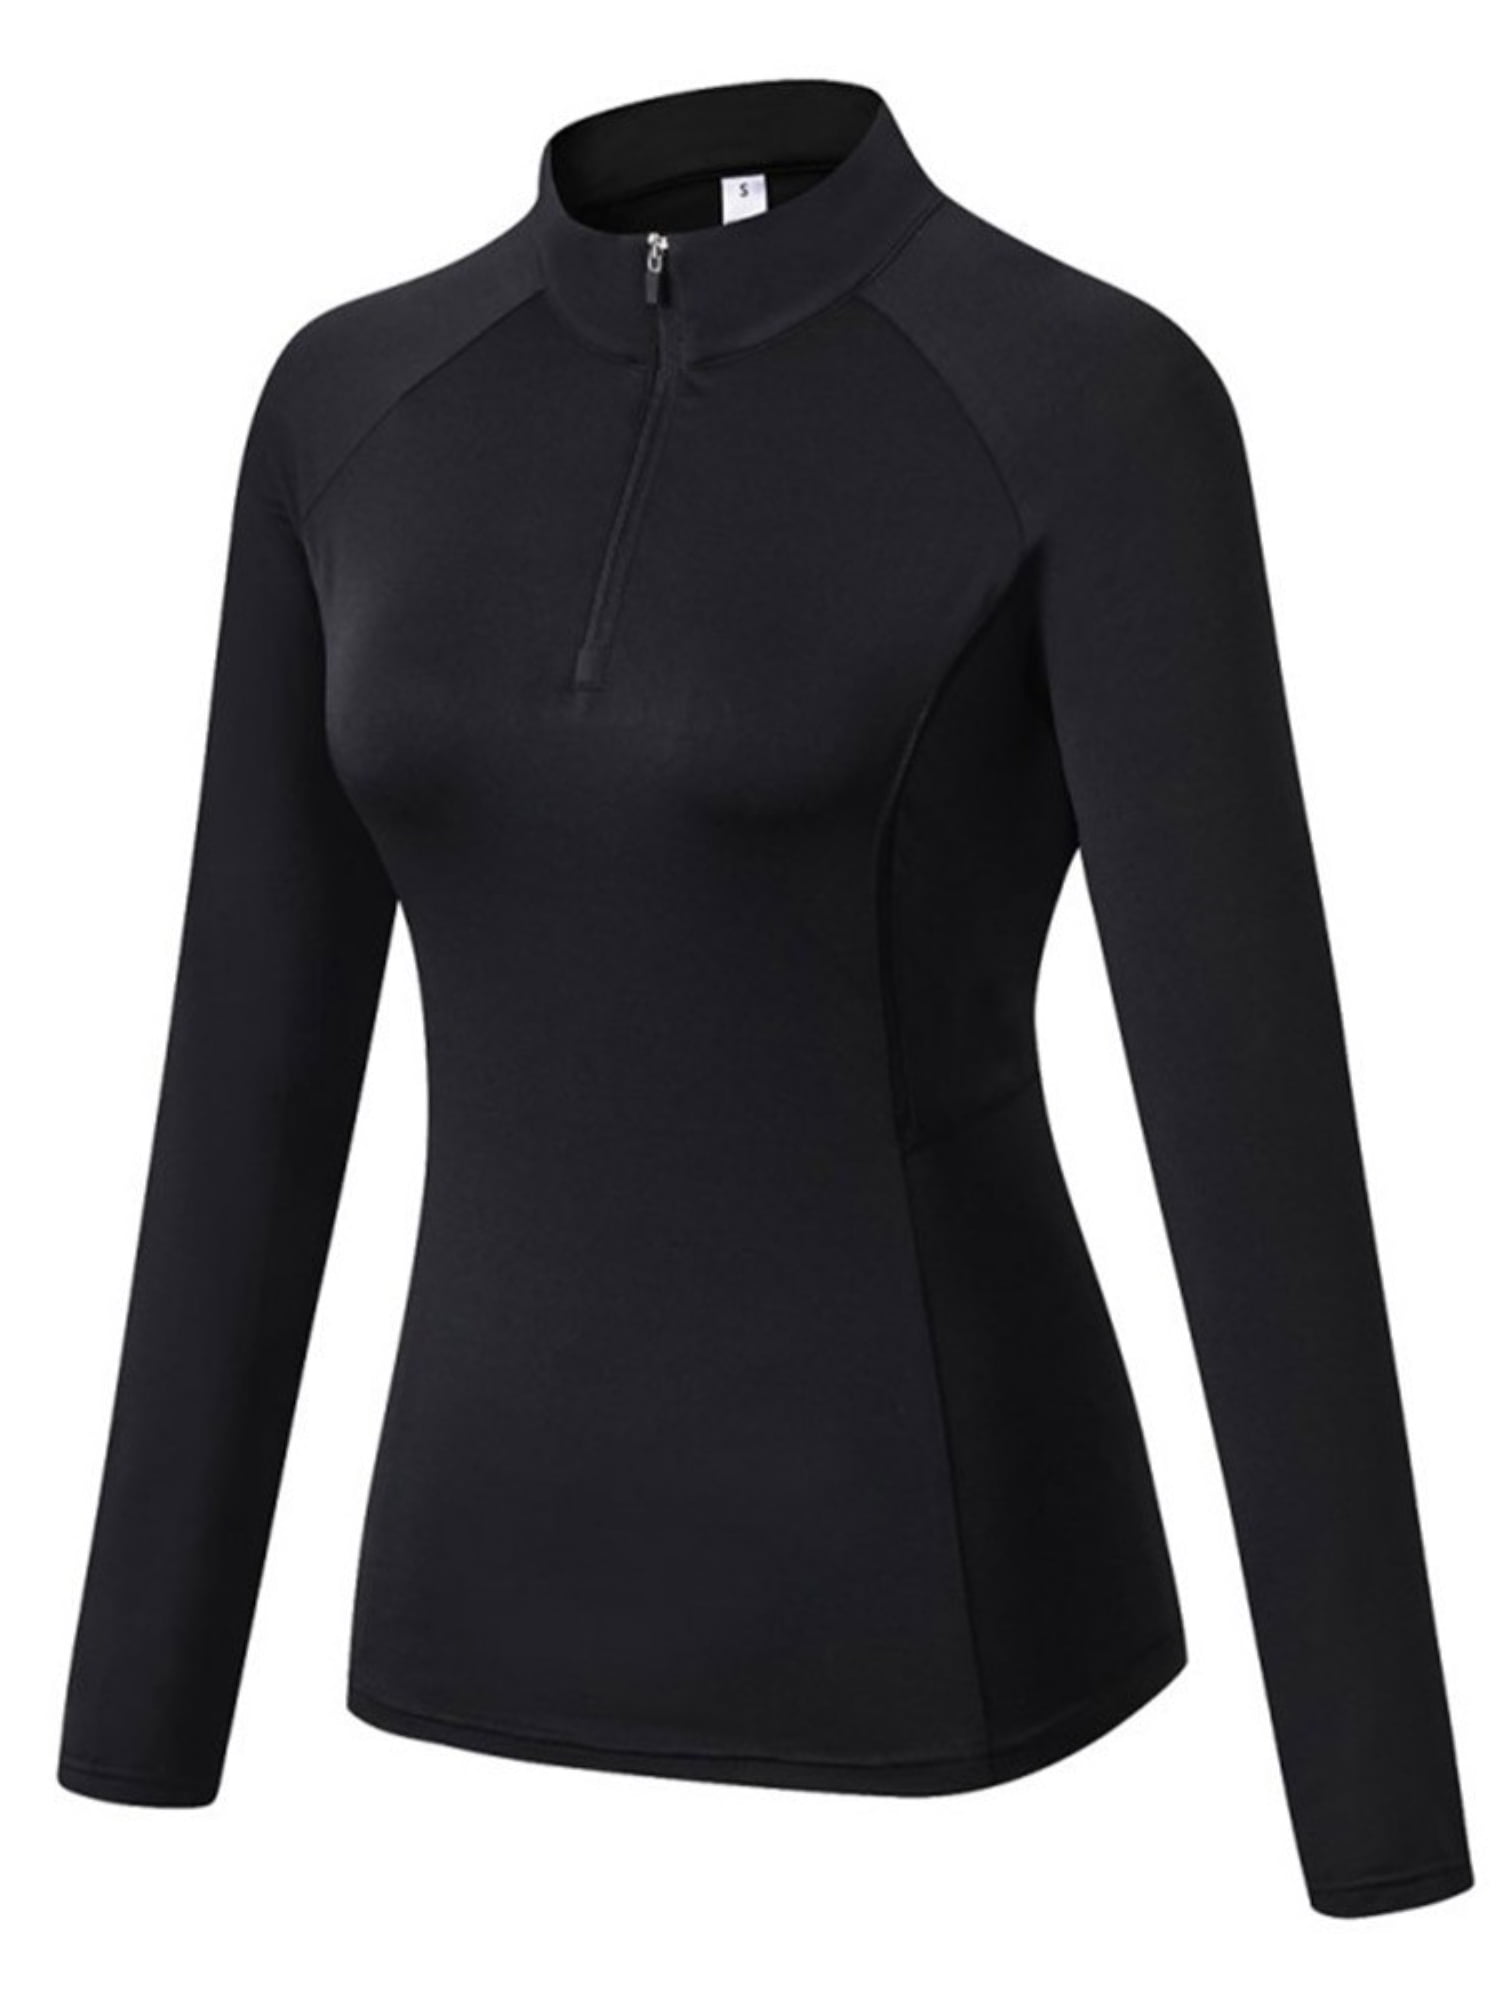 Women's Long Sleeve Active Running T-Shirt with Thumb Hole - Black-side  Zipped Pocket - CY17YD8ACH5 Size Medium